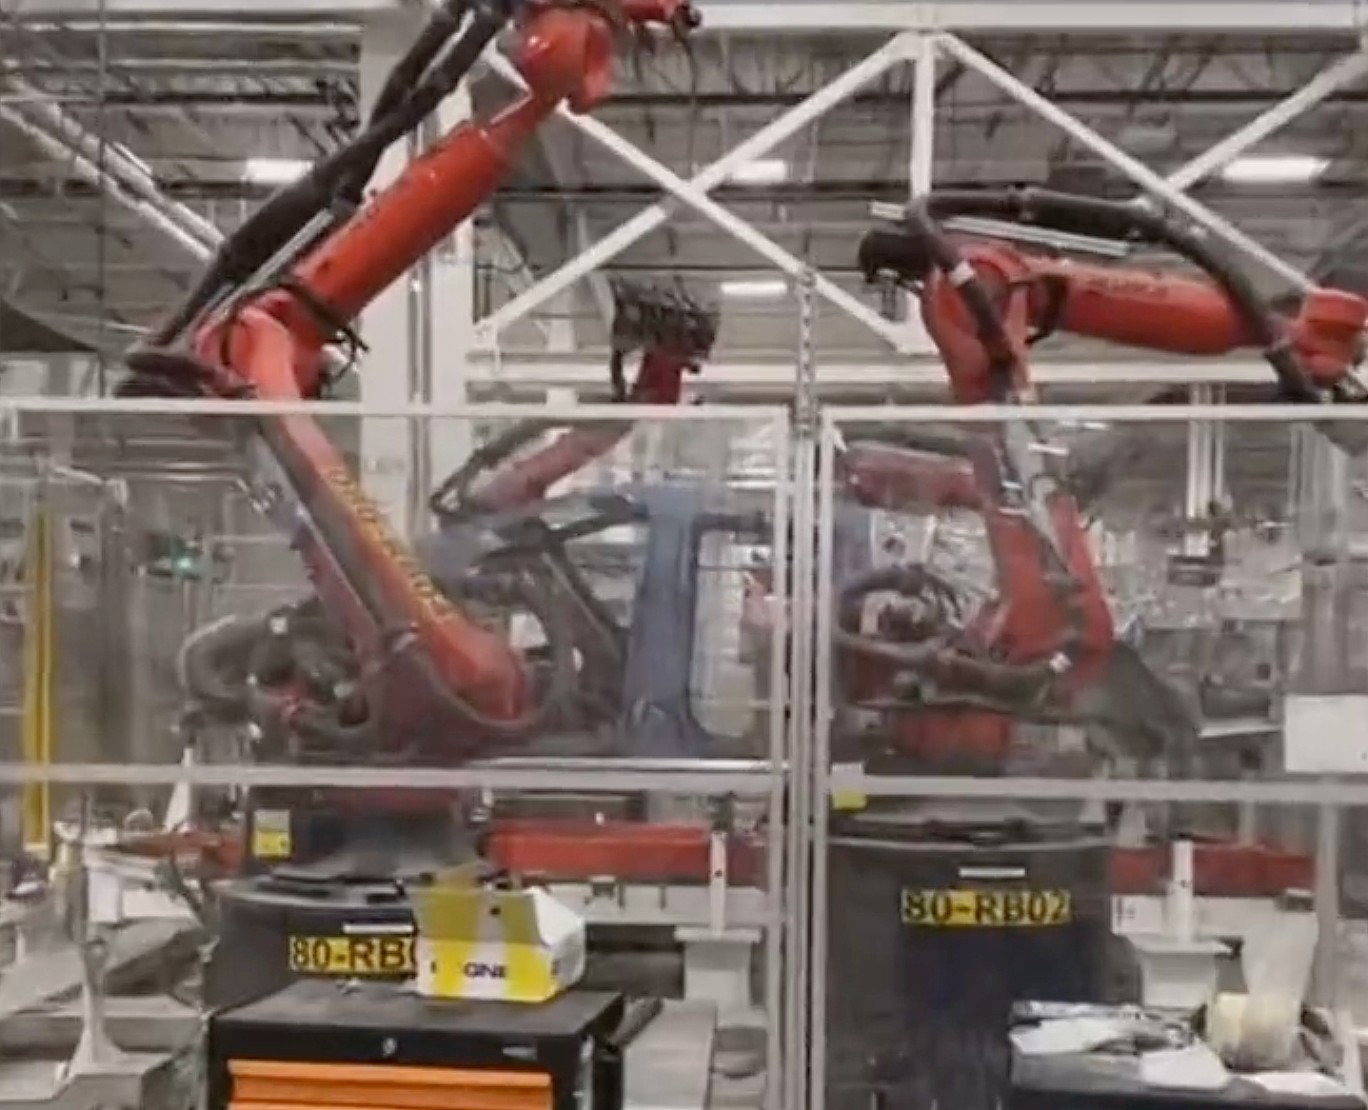 Tesla Cybertruck production at Giga Texas seen in new leaked video